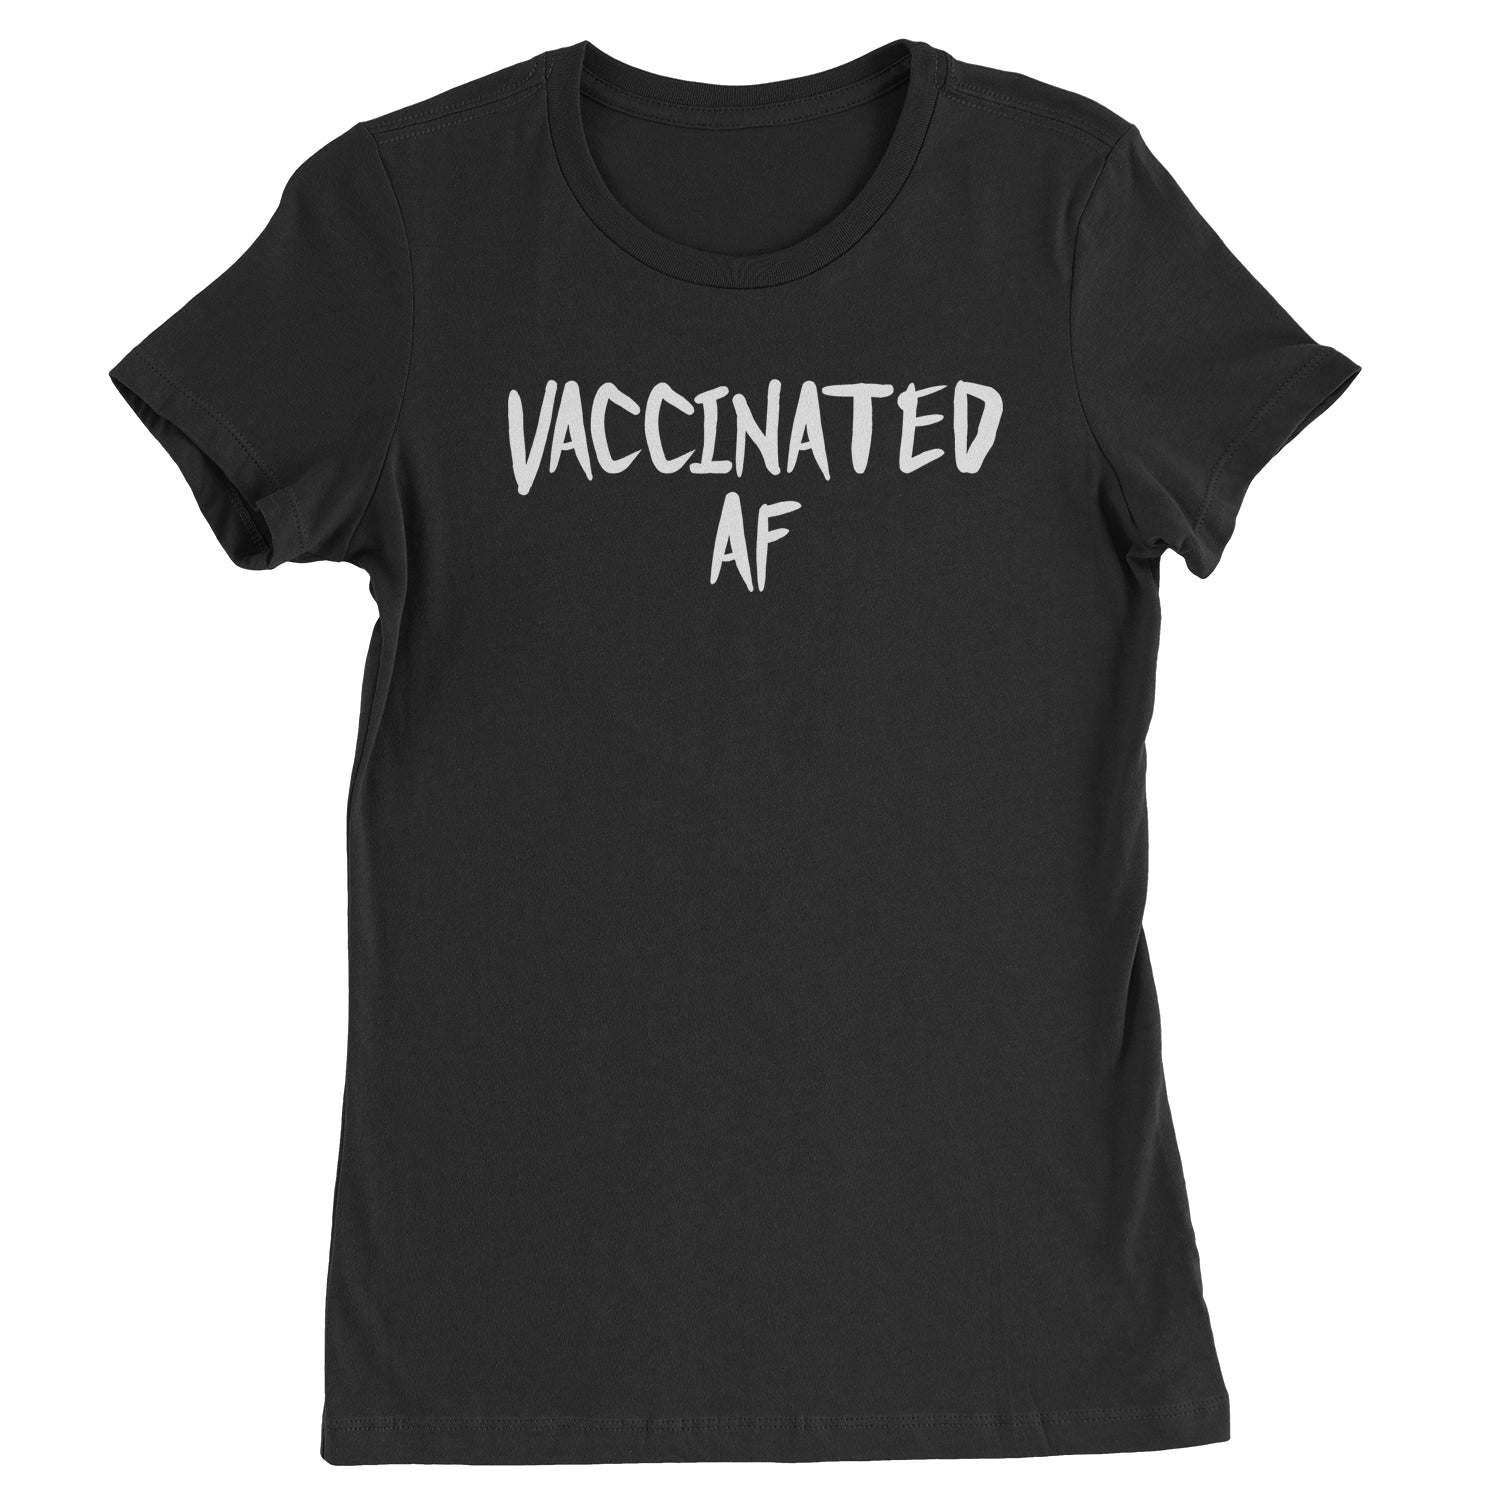 Vaccinated AF Pro Vaccine Funny Vaccination Health Womens T-shirt moderna, pfizer, vaccine, vax, vaxx by Expression Tees